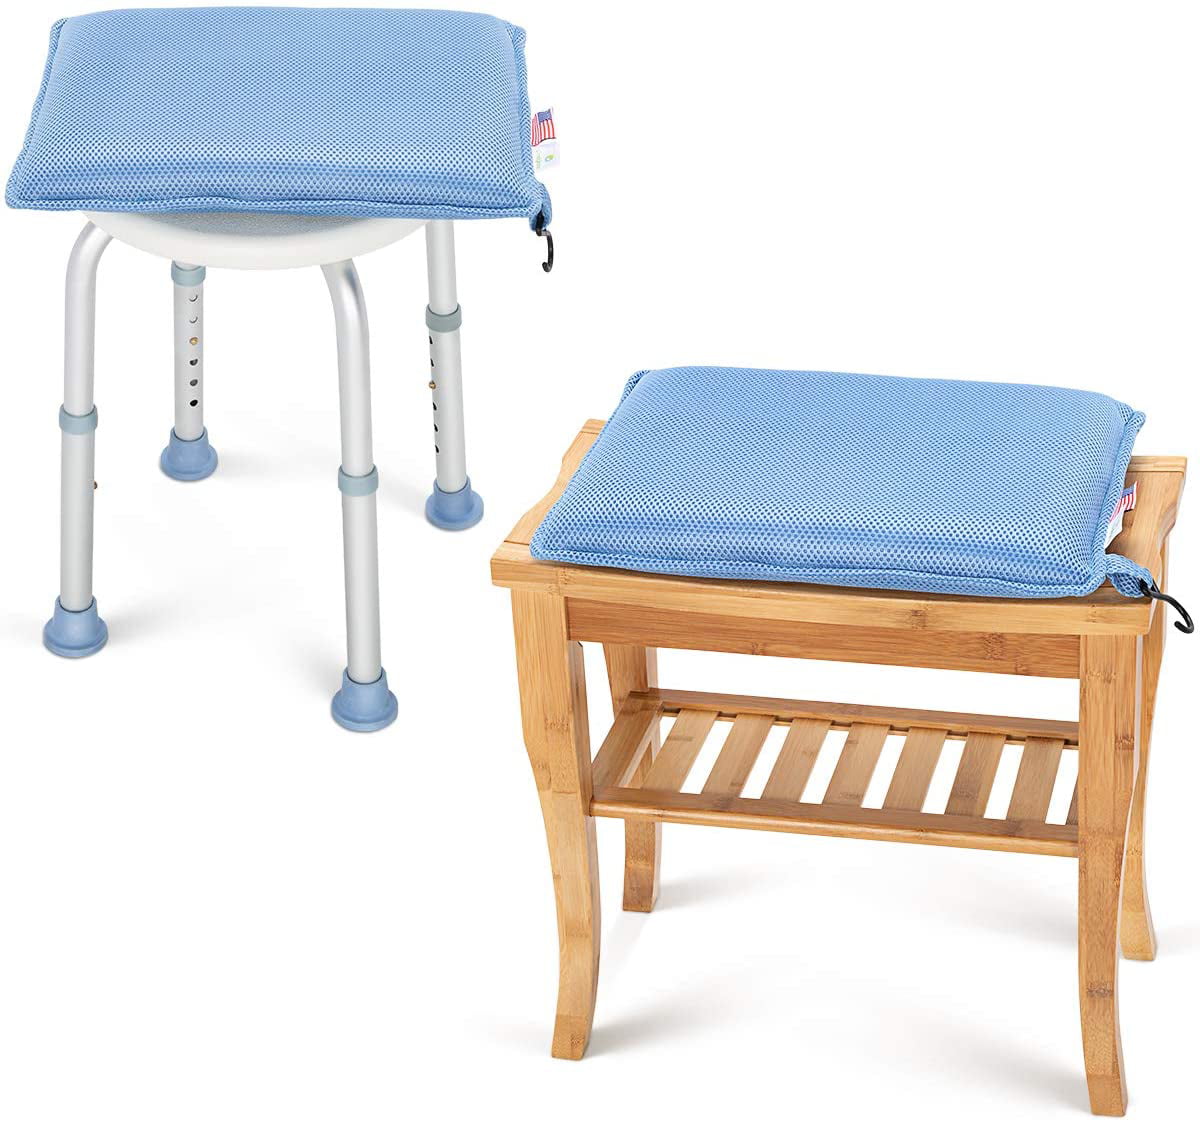 OasisSpace Shower Chair Cushion, Transfer Bench Shower ...